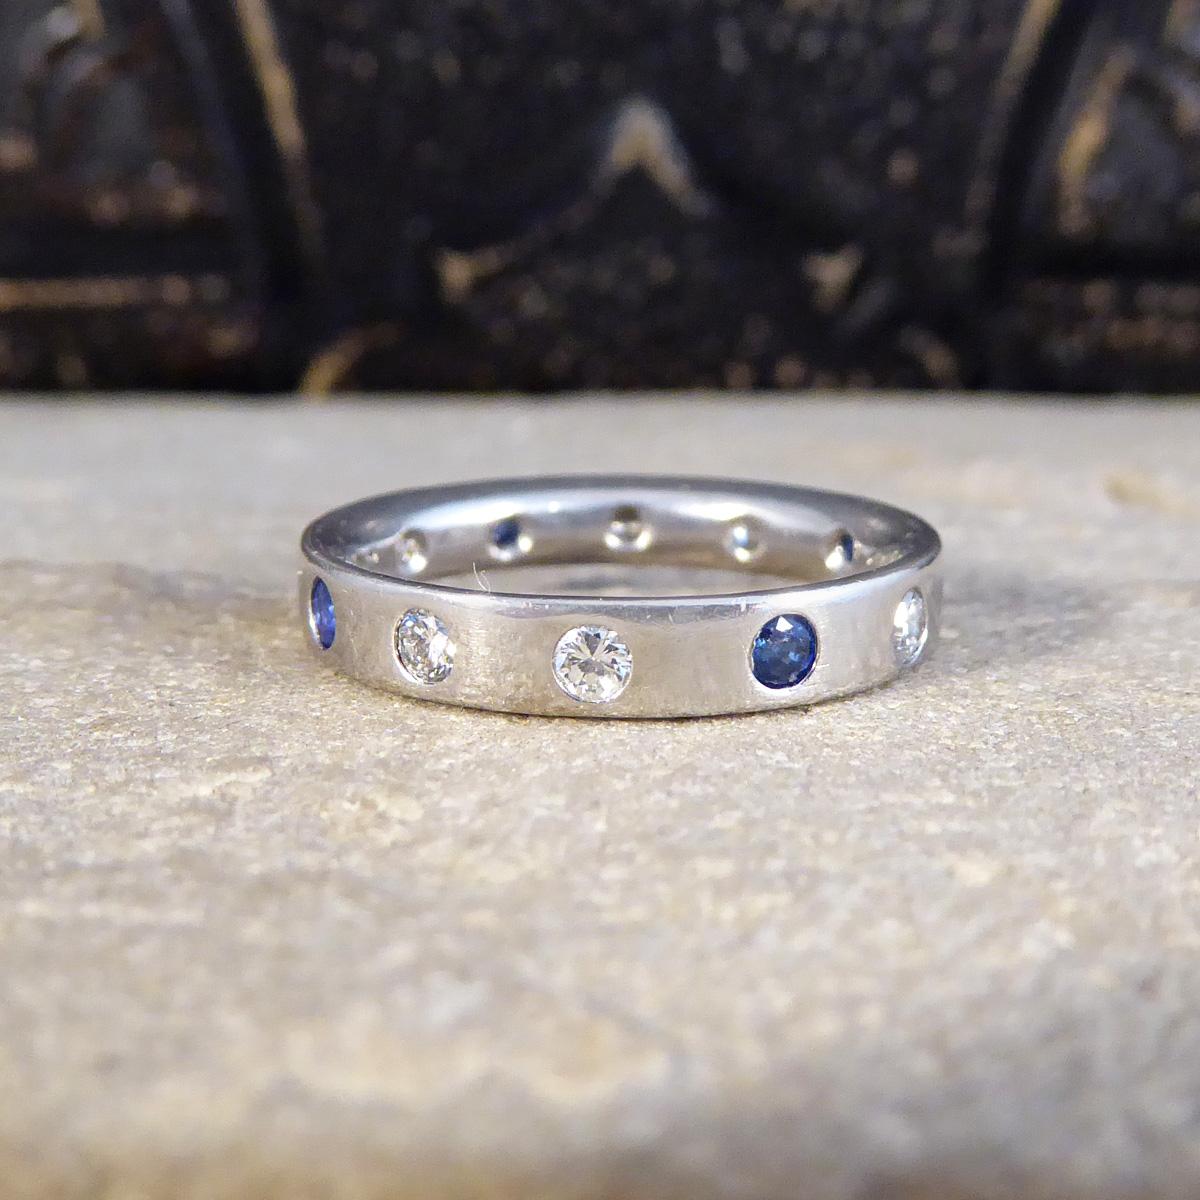 A beautifully set full Diamond and Sapphire band ring. Set into a 3.2mm Platinum band are four bright and blue Sapphires with two Diamonds of equal size set in between the Sapphires at an equal distance giving it the same pattern throughout the